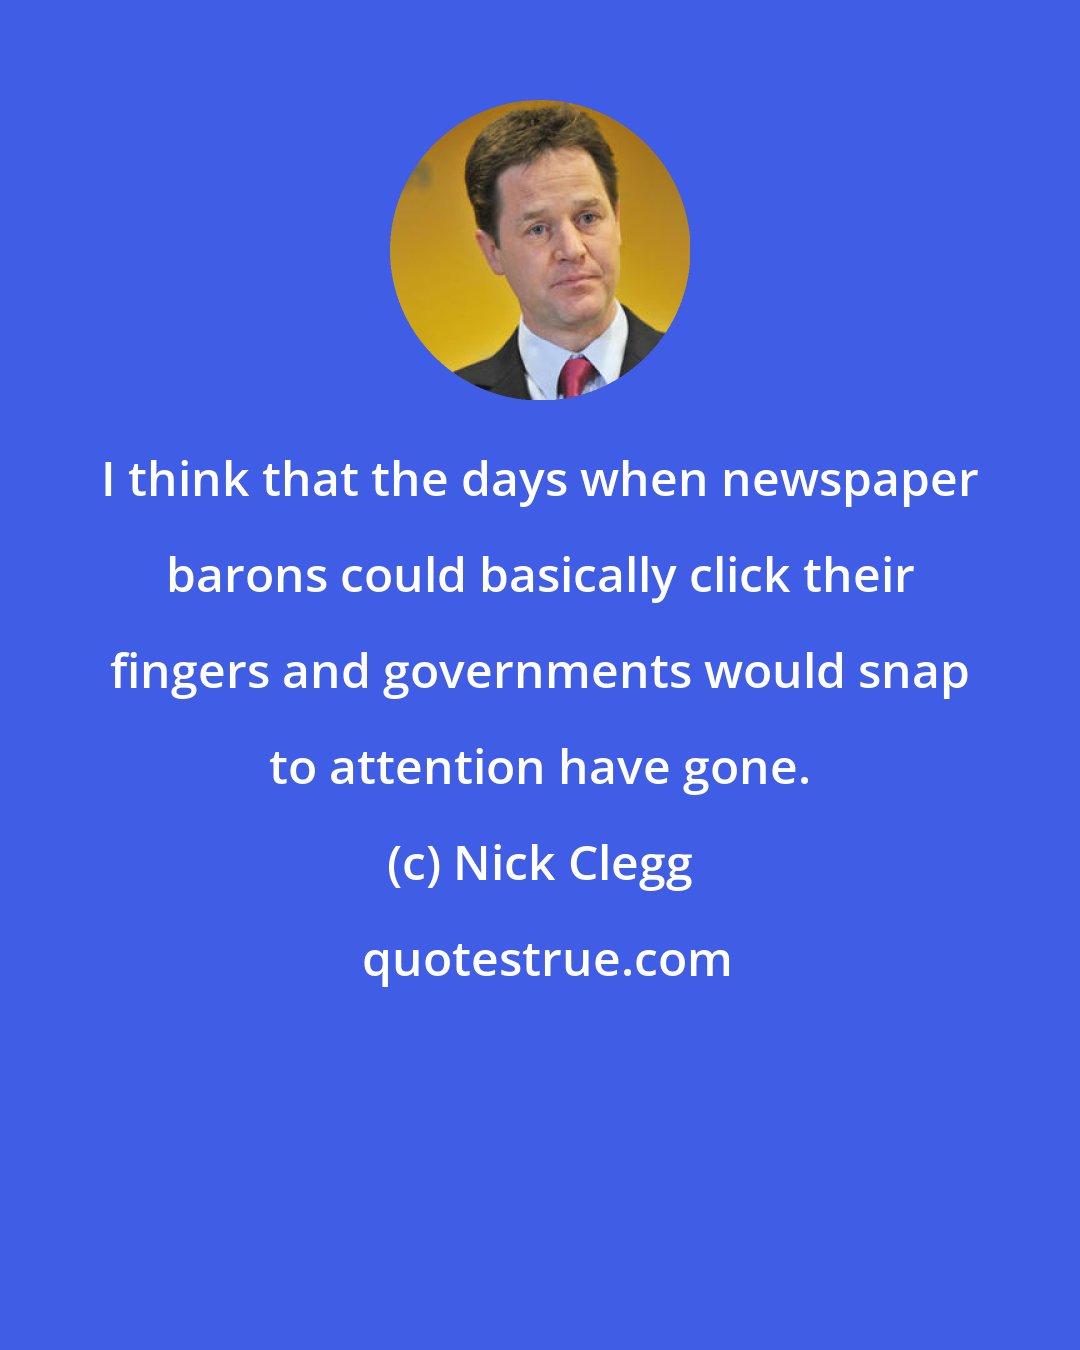 Nick Clegg: I think that the days when newspaper barons could basically click their fingers and governments would snap to attention have gone.